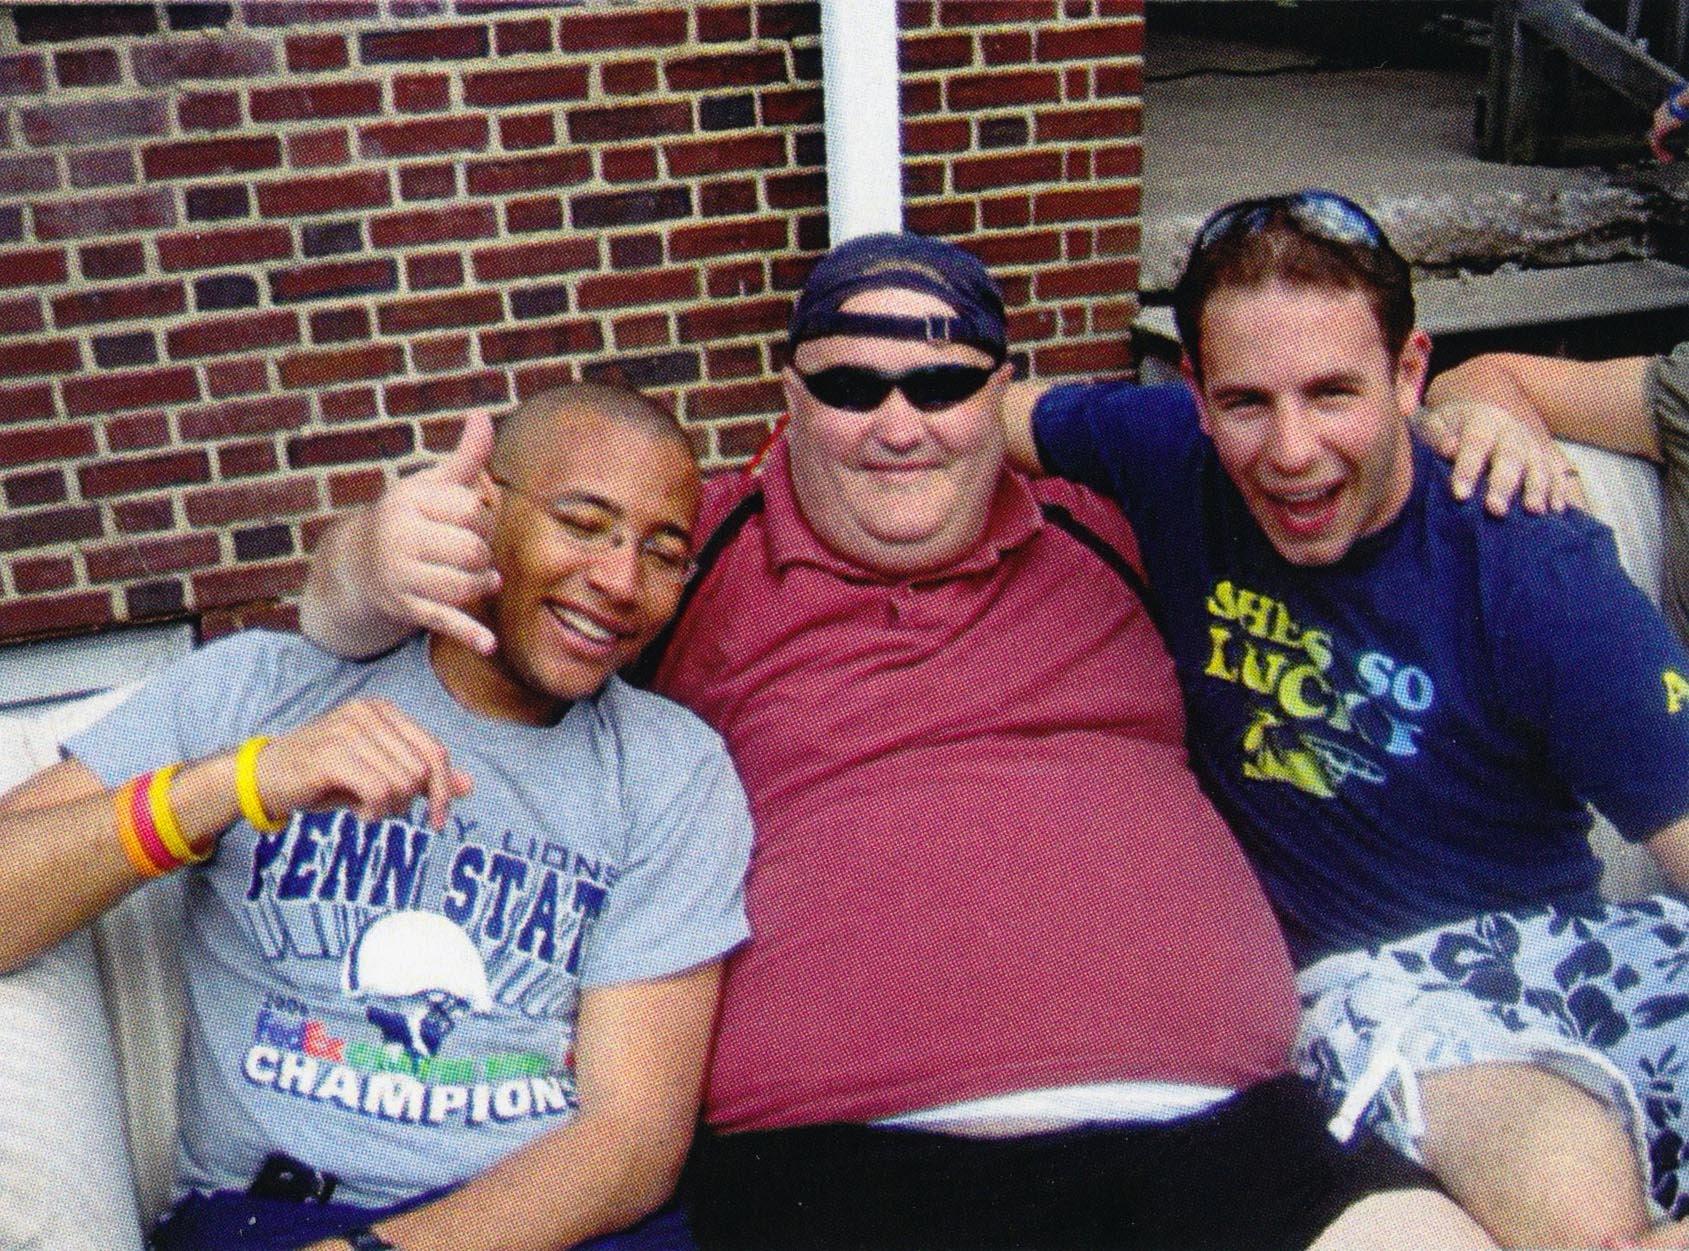  L to R: Michael Crawrford, Mark Outland and Dave Gendelman
2006 Springtime cookout 